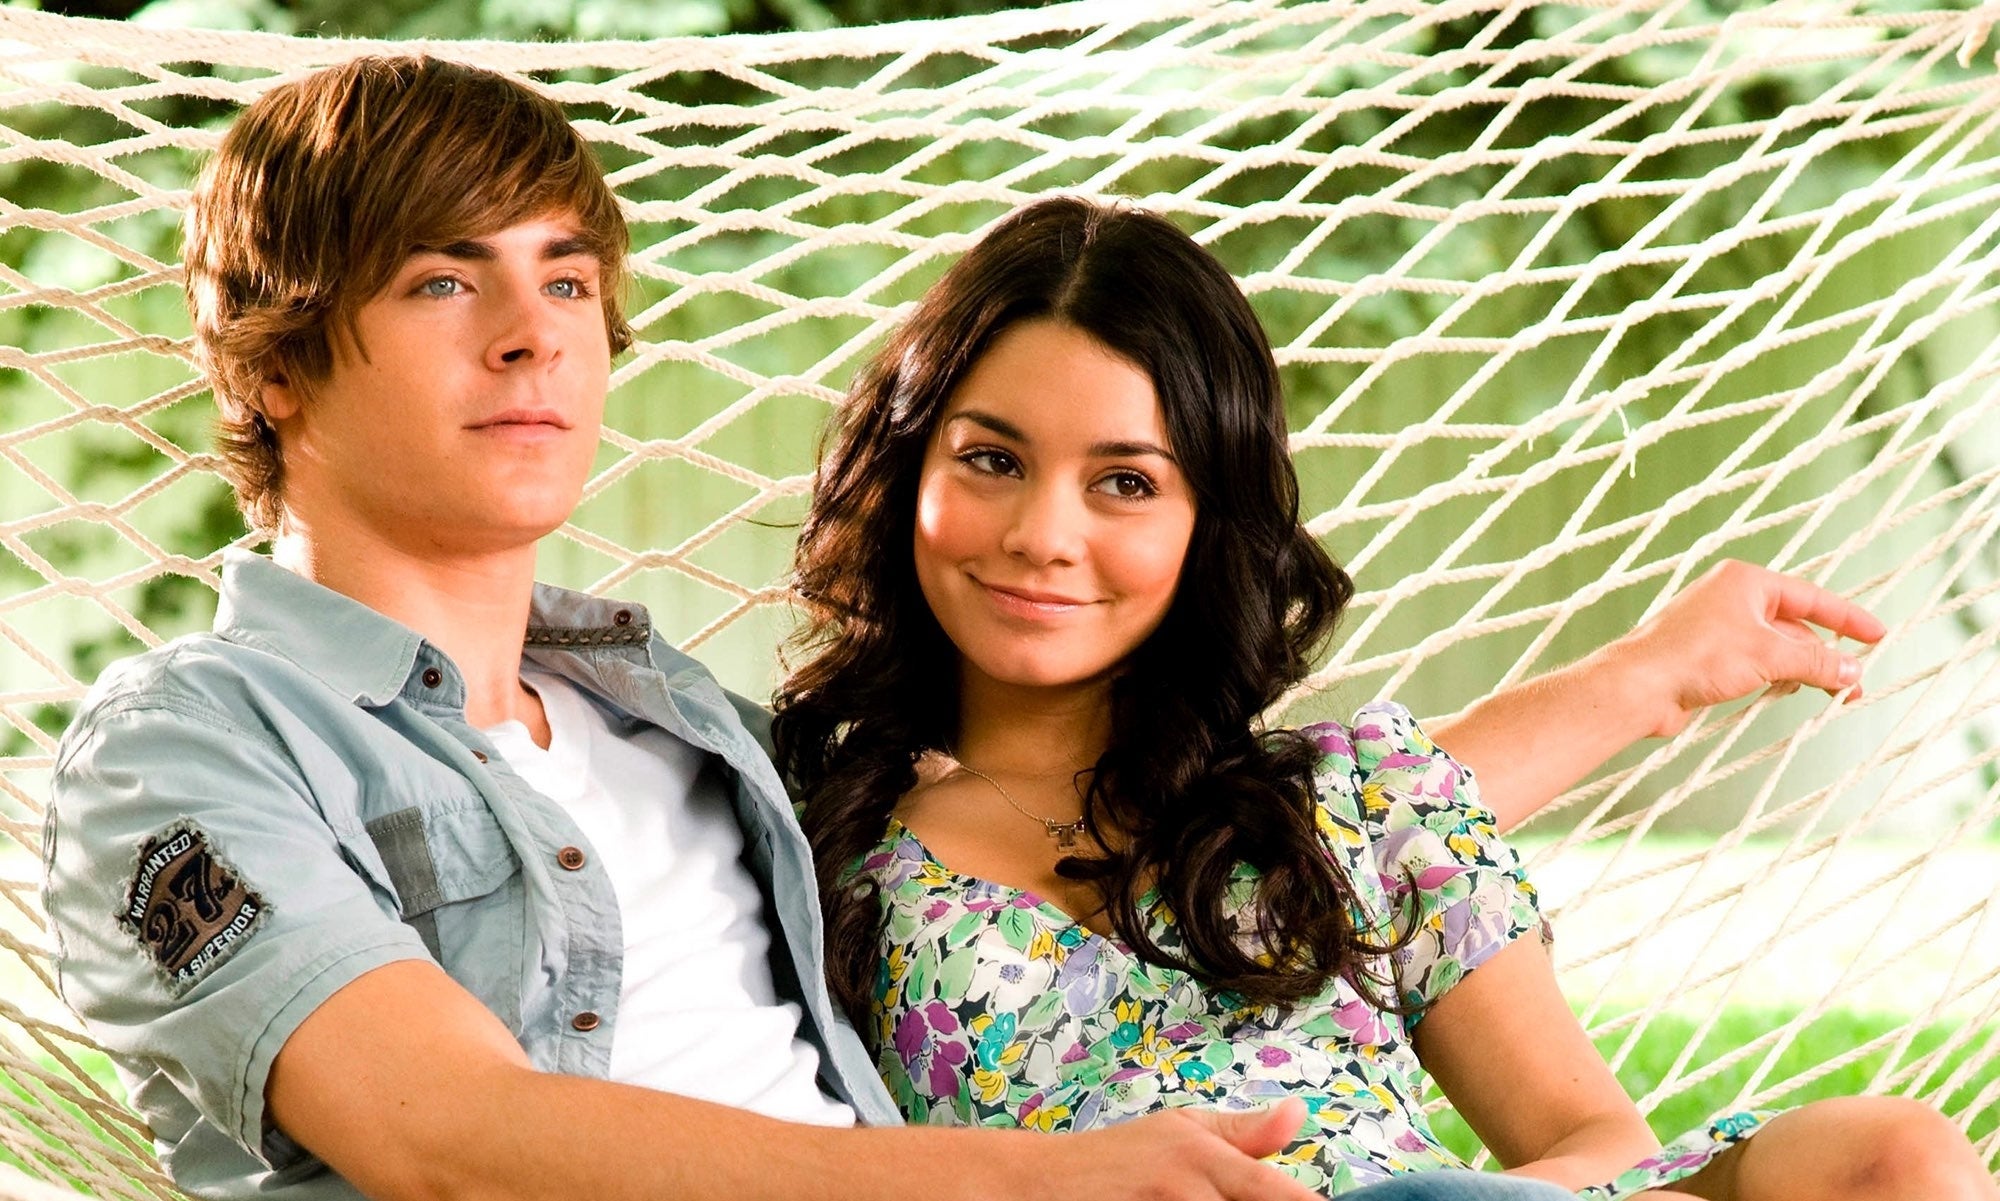 Close-up of Zac and Vanessa sitting together in a movie scene